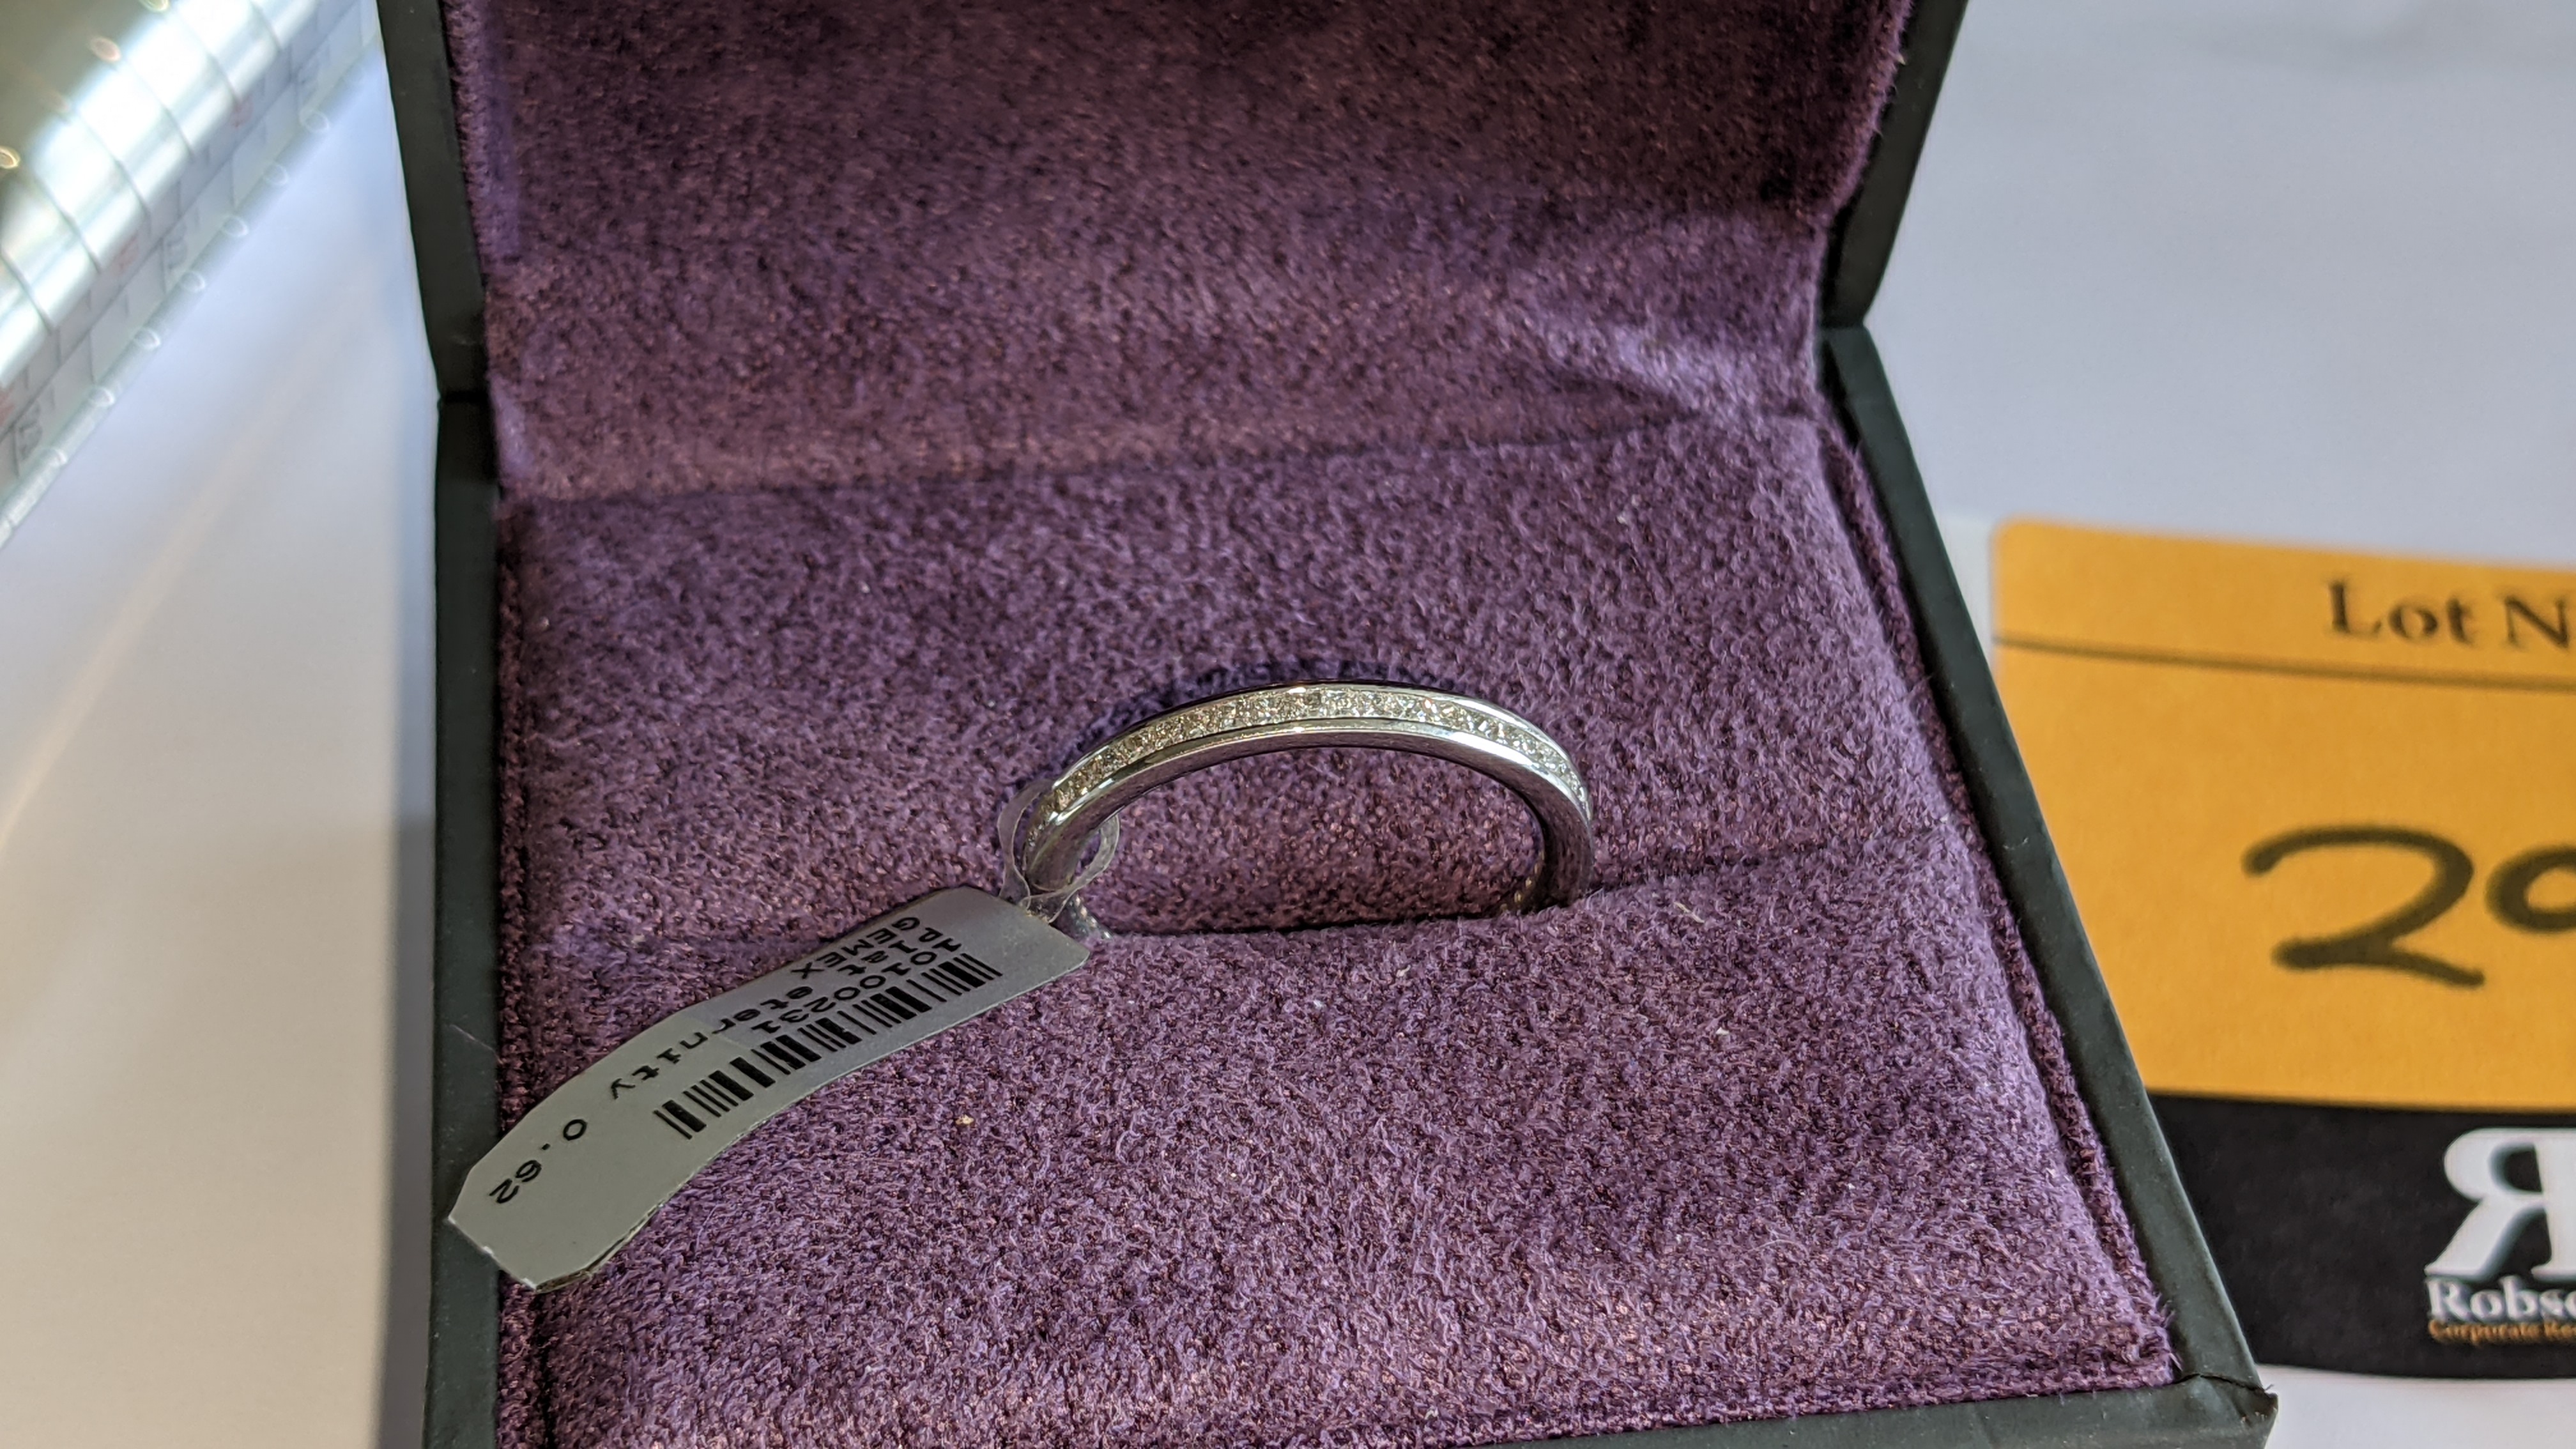 Eternity ring in Platinum 950 with 0.62ct of diamonds. RRP £2,097